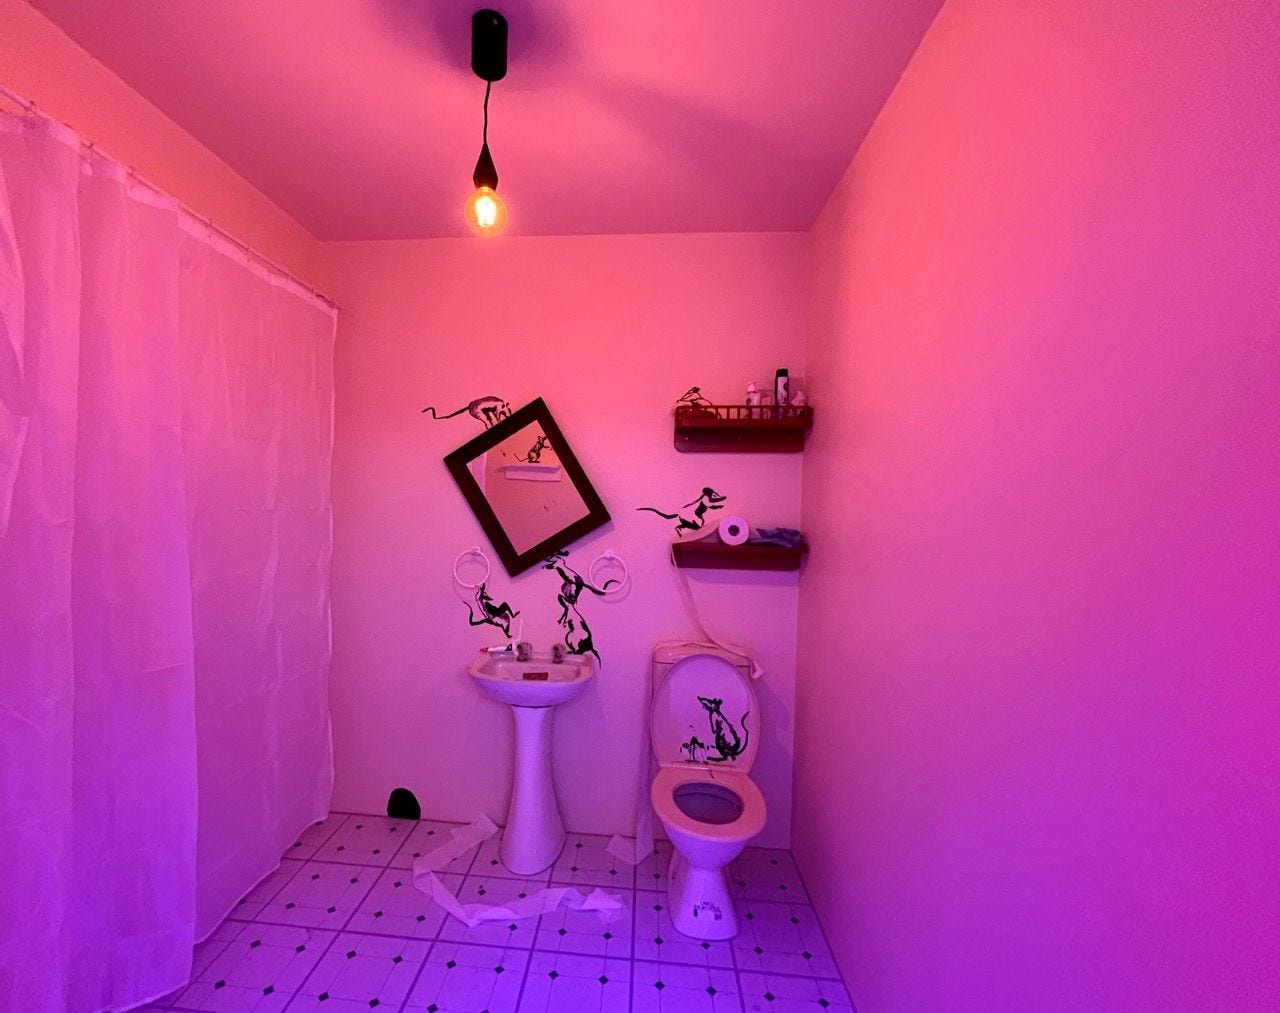 A bathroom with a pink hue to it, with mice crawling around the sink and the toilet